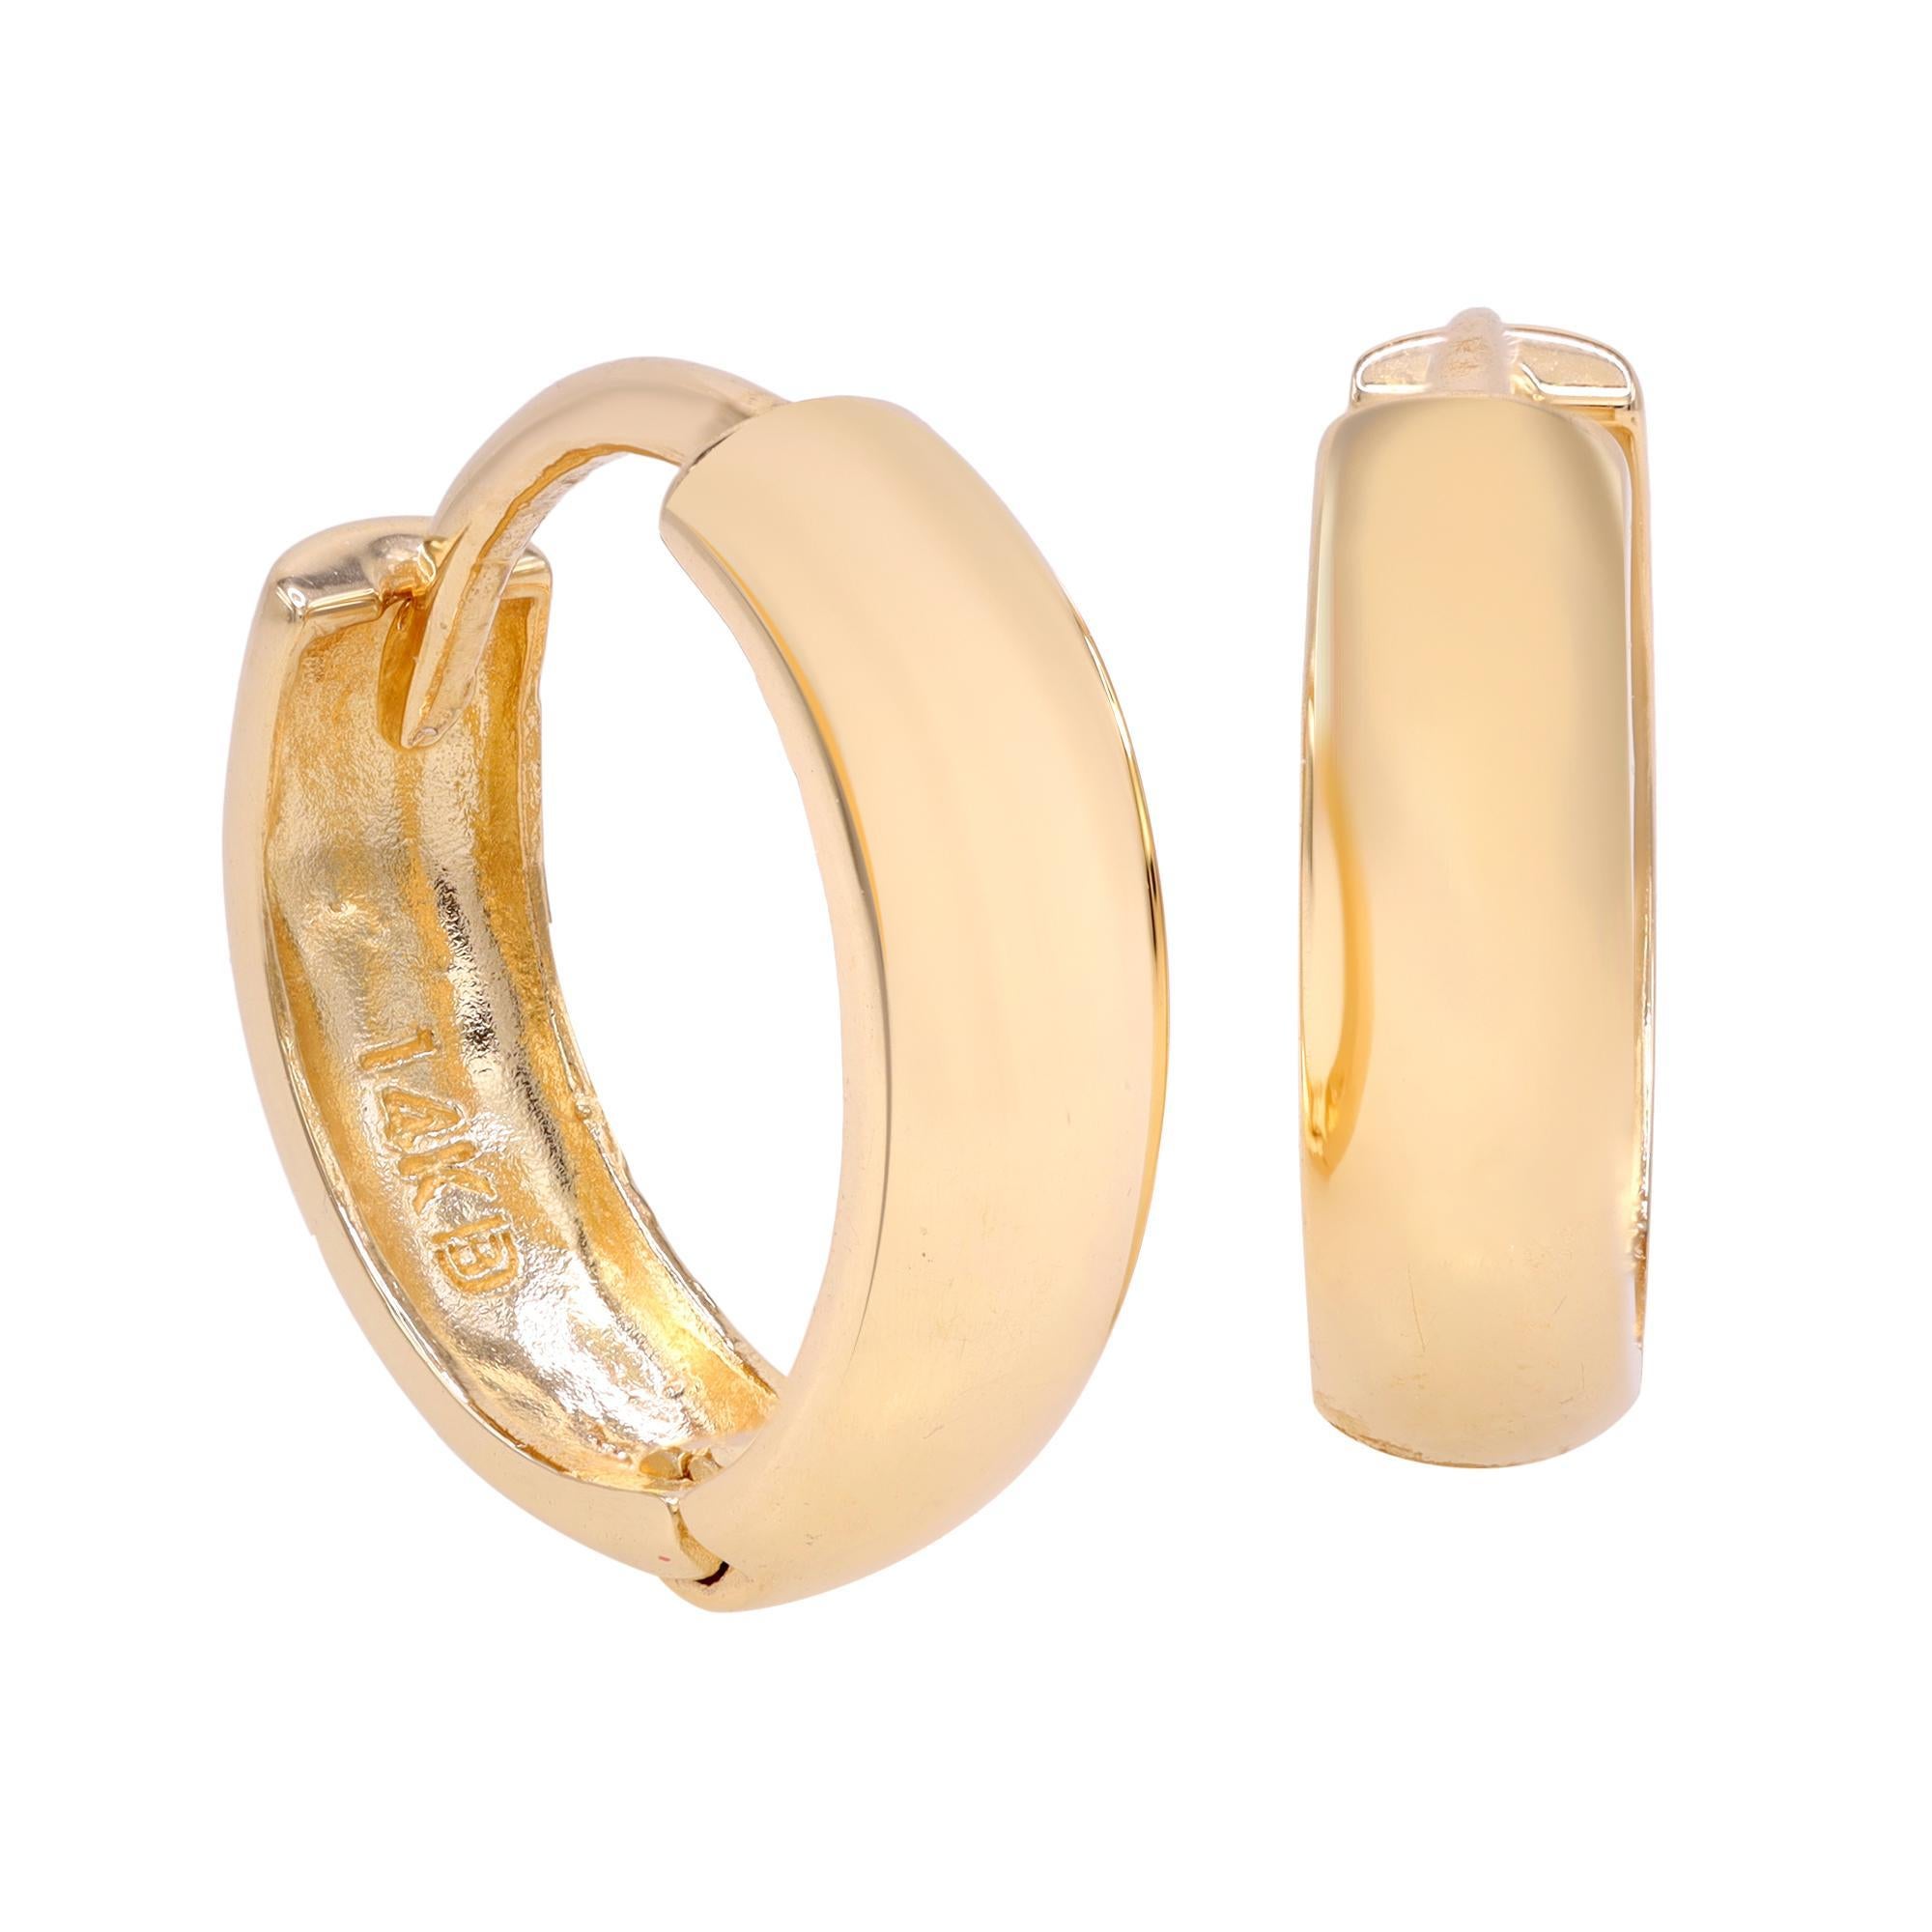 Simple, elegant and yet classic, 14k yellow gold hinged huggie small hoop earrings. These earrings will stay on your ears for as long as you need them to. A hinged body design means they are easy to put on and take off. Length 12mm, width 3.00mm.